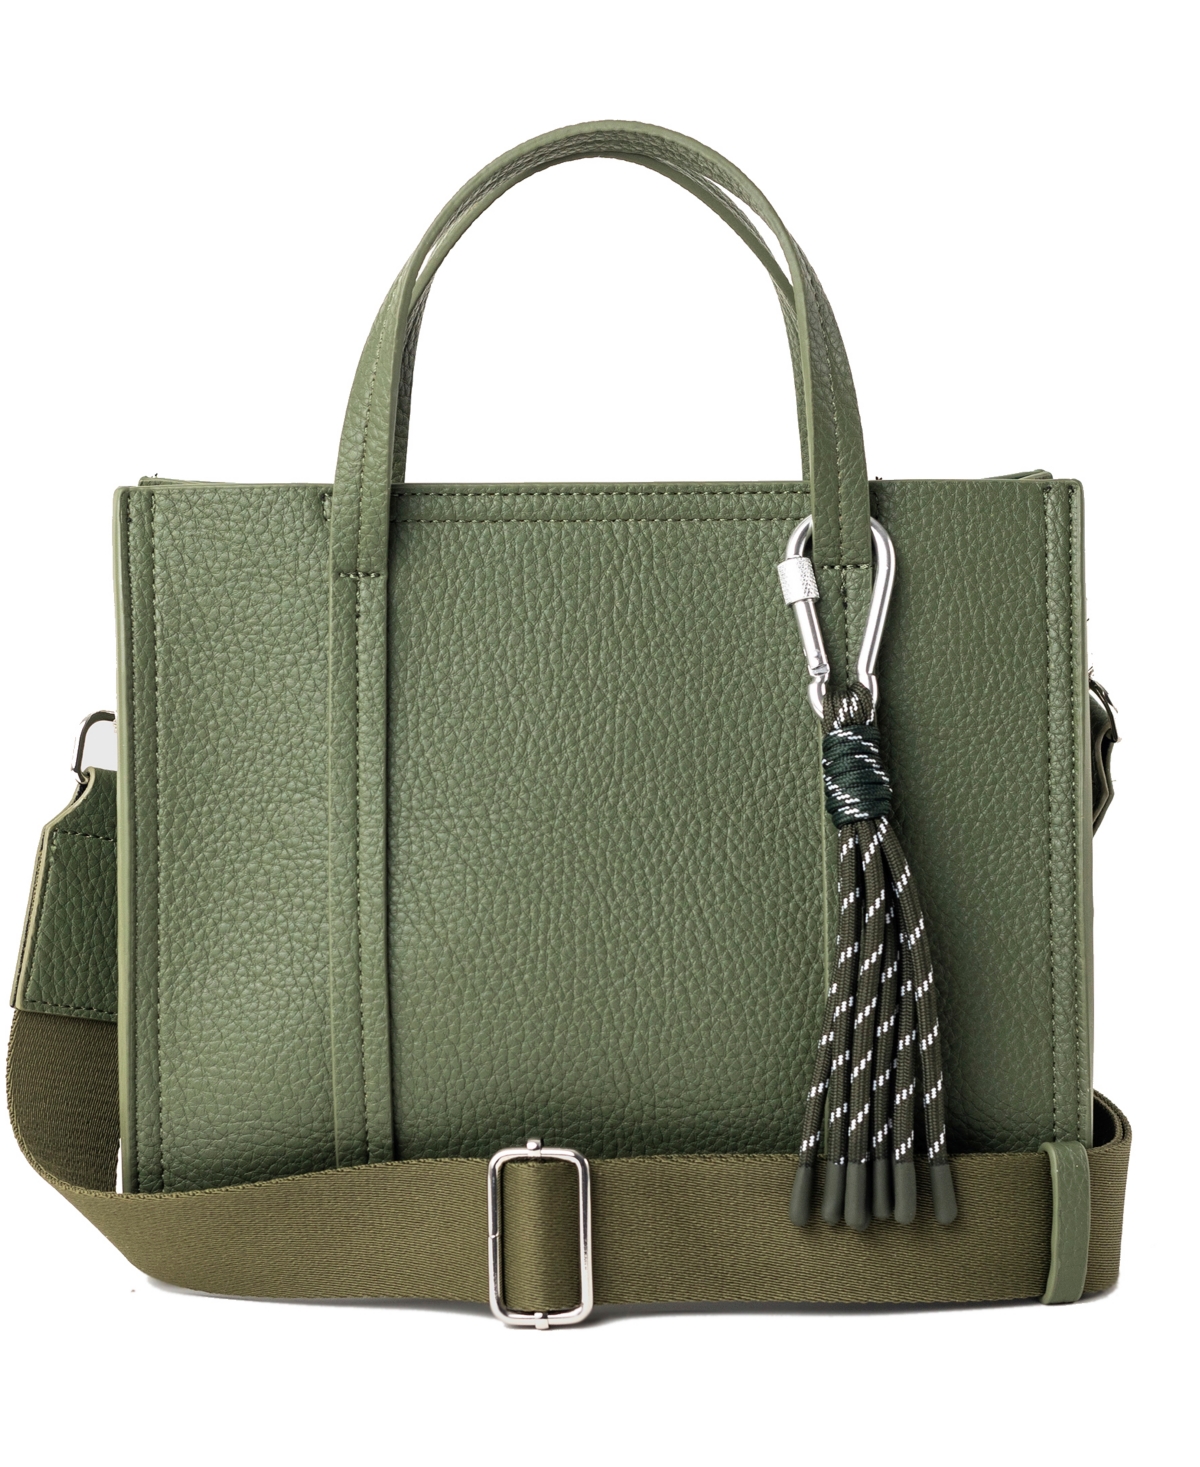 Urban Originals Fearless Faux Leather Tote Bag In Green